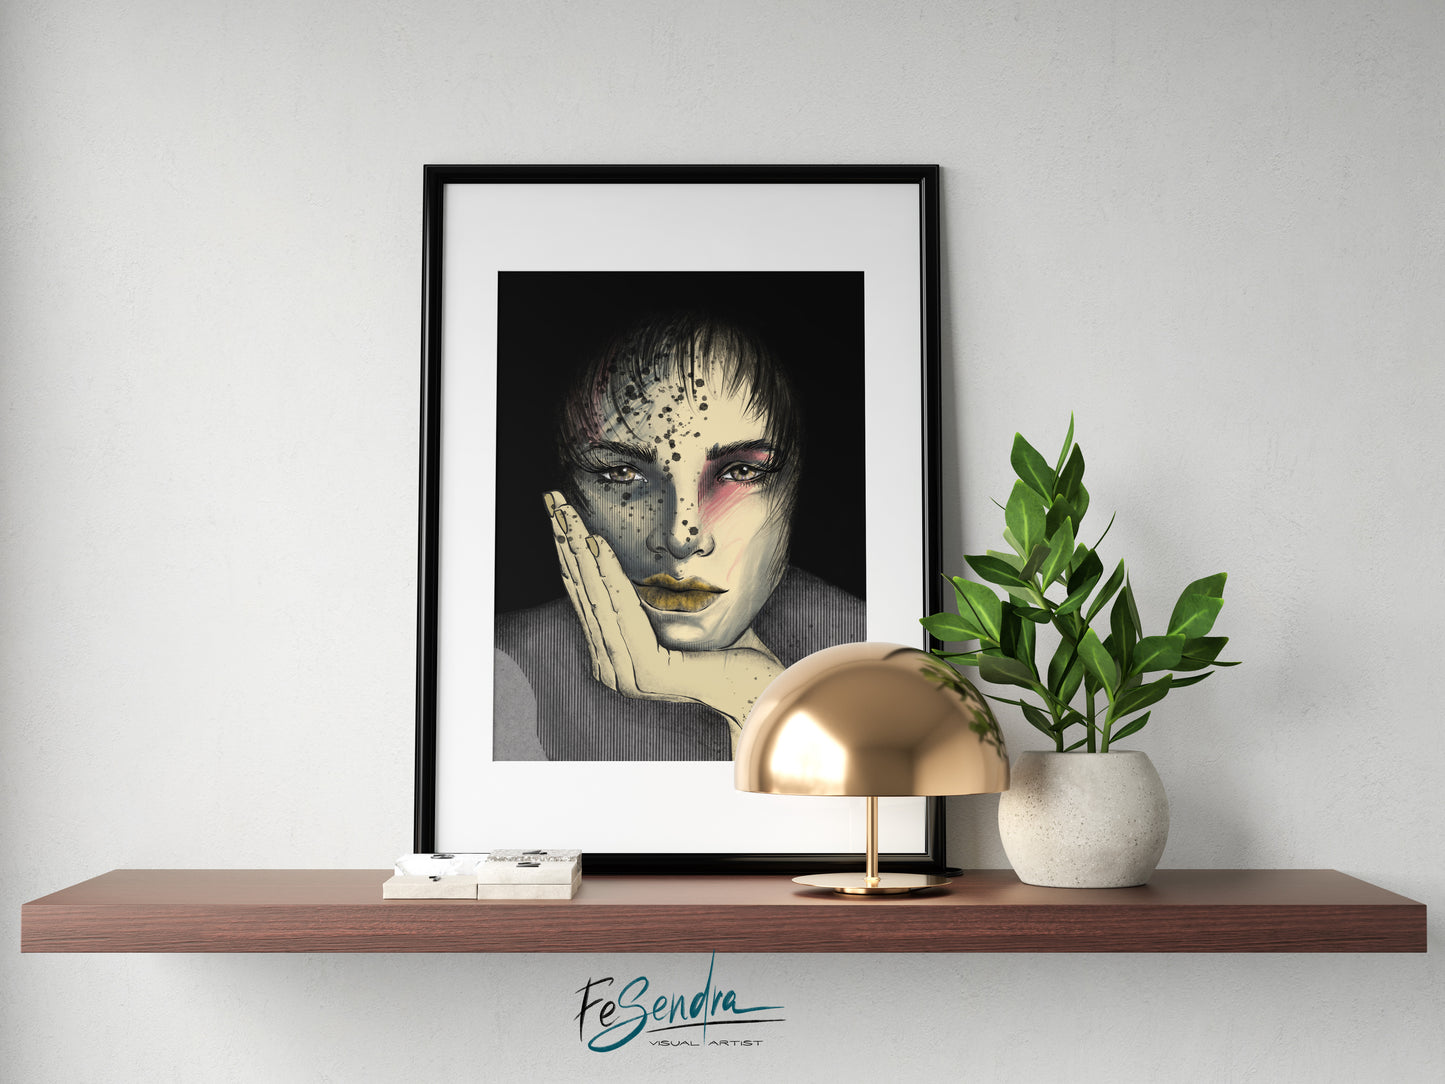 Printed Poster - Woman Portrait by FeSendra